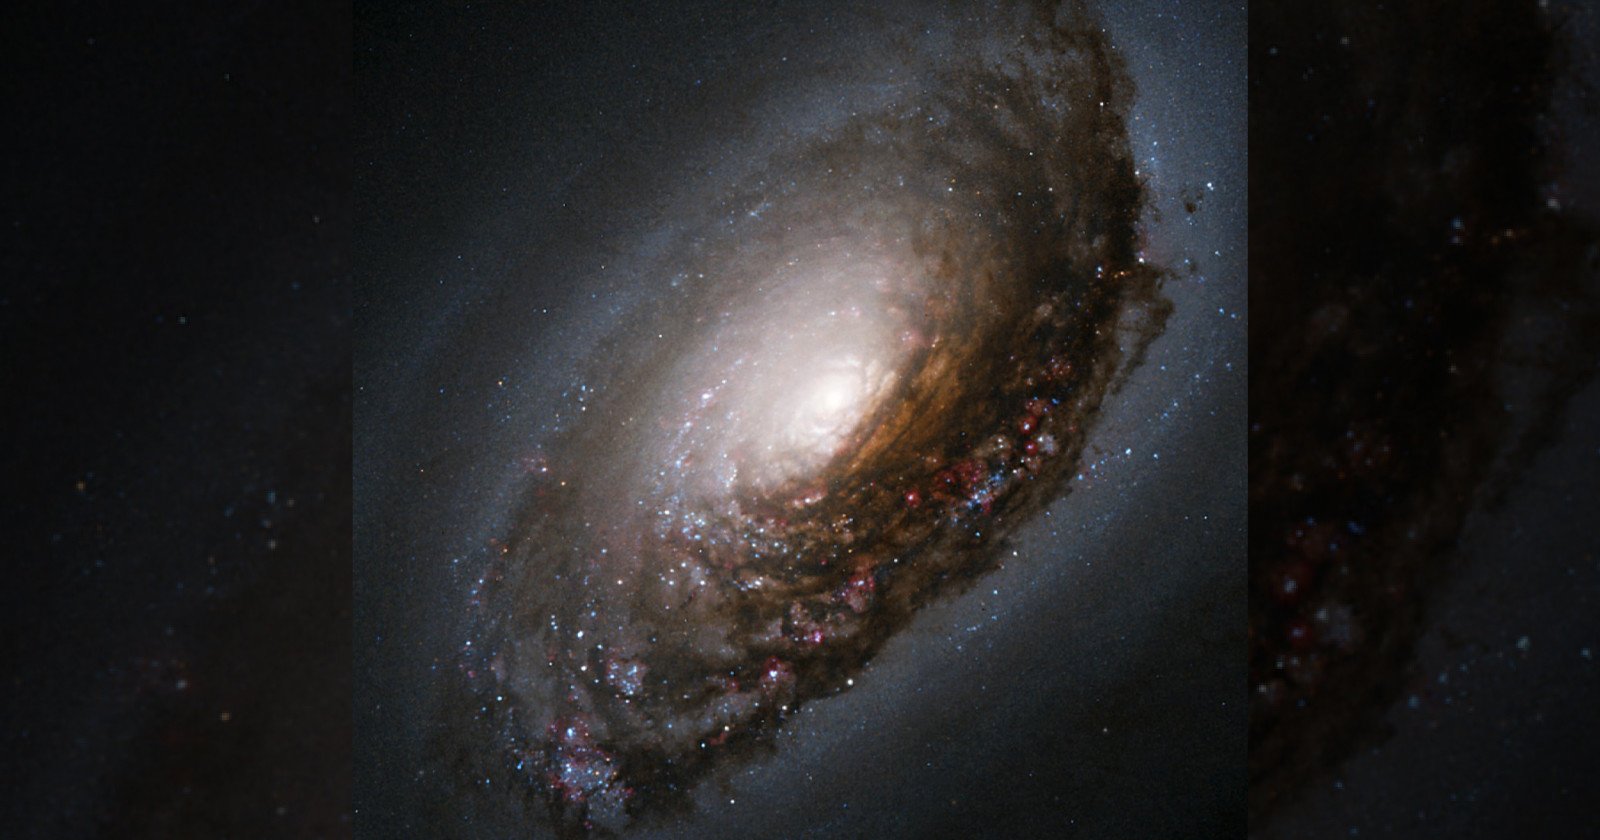 May is the Best Time to Photograph the Unusual ‘Black Eye’ Galaxy